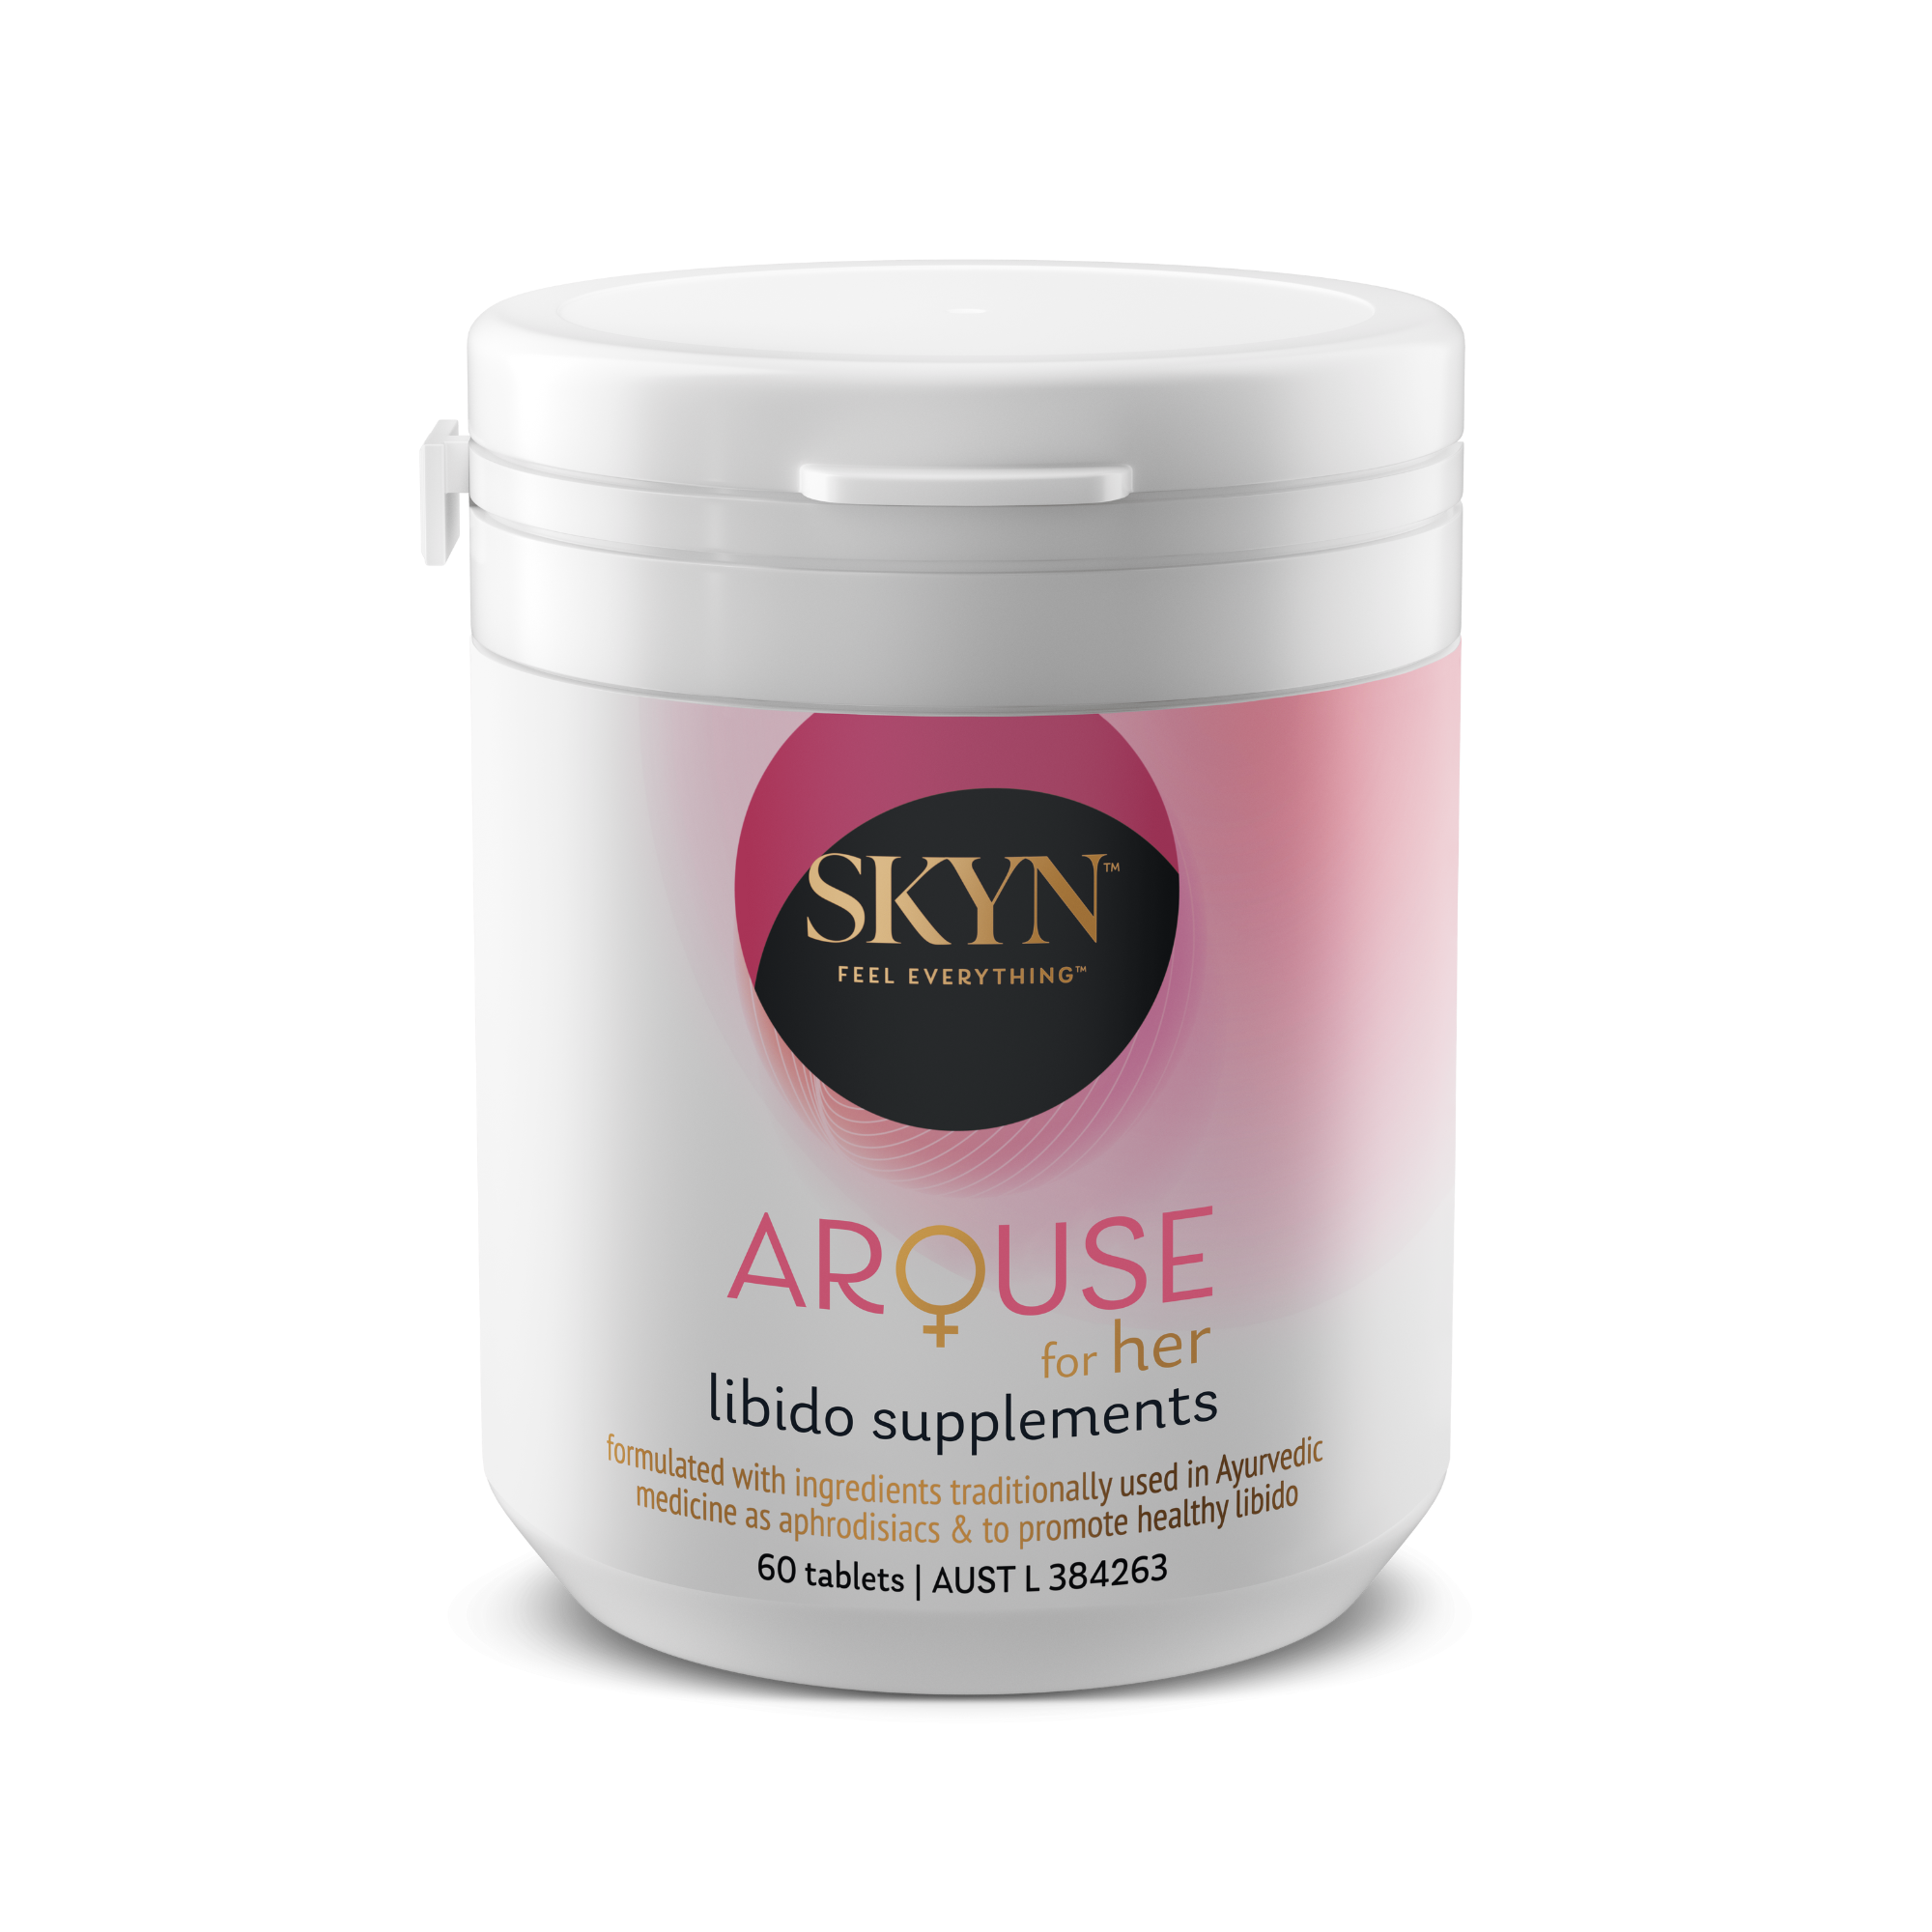 SKYN™ Arouse for Her Libido Supplements